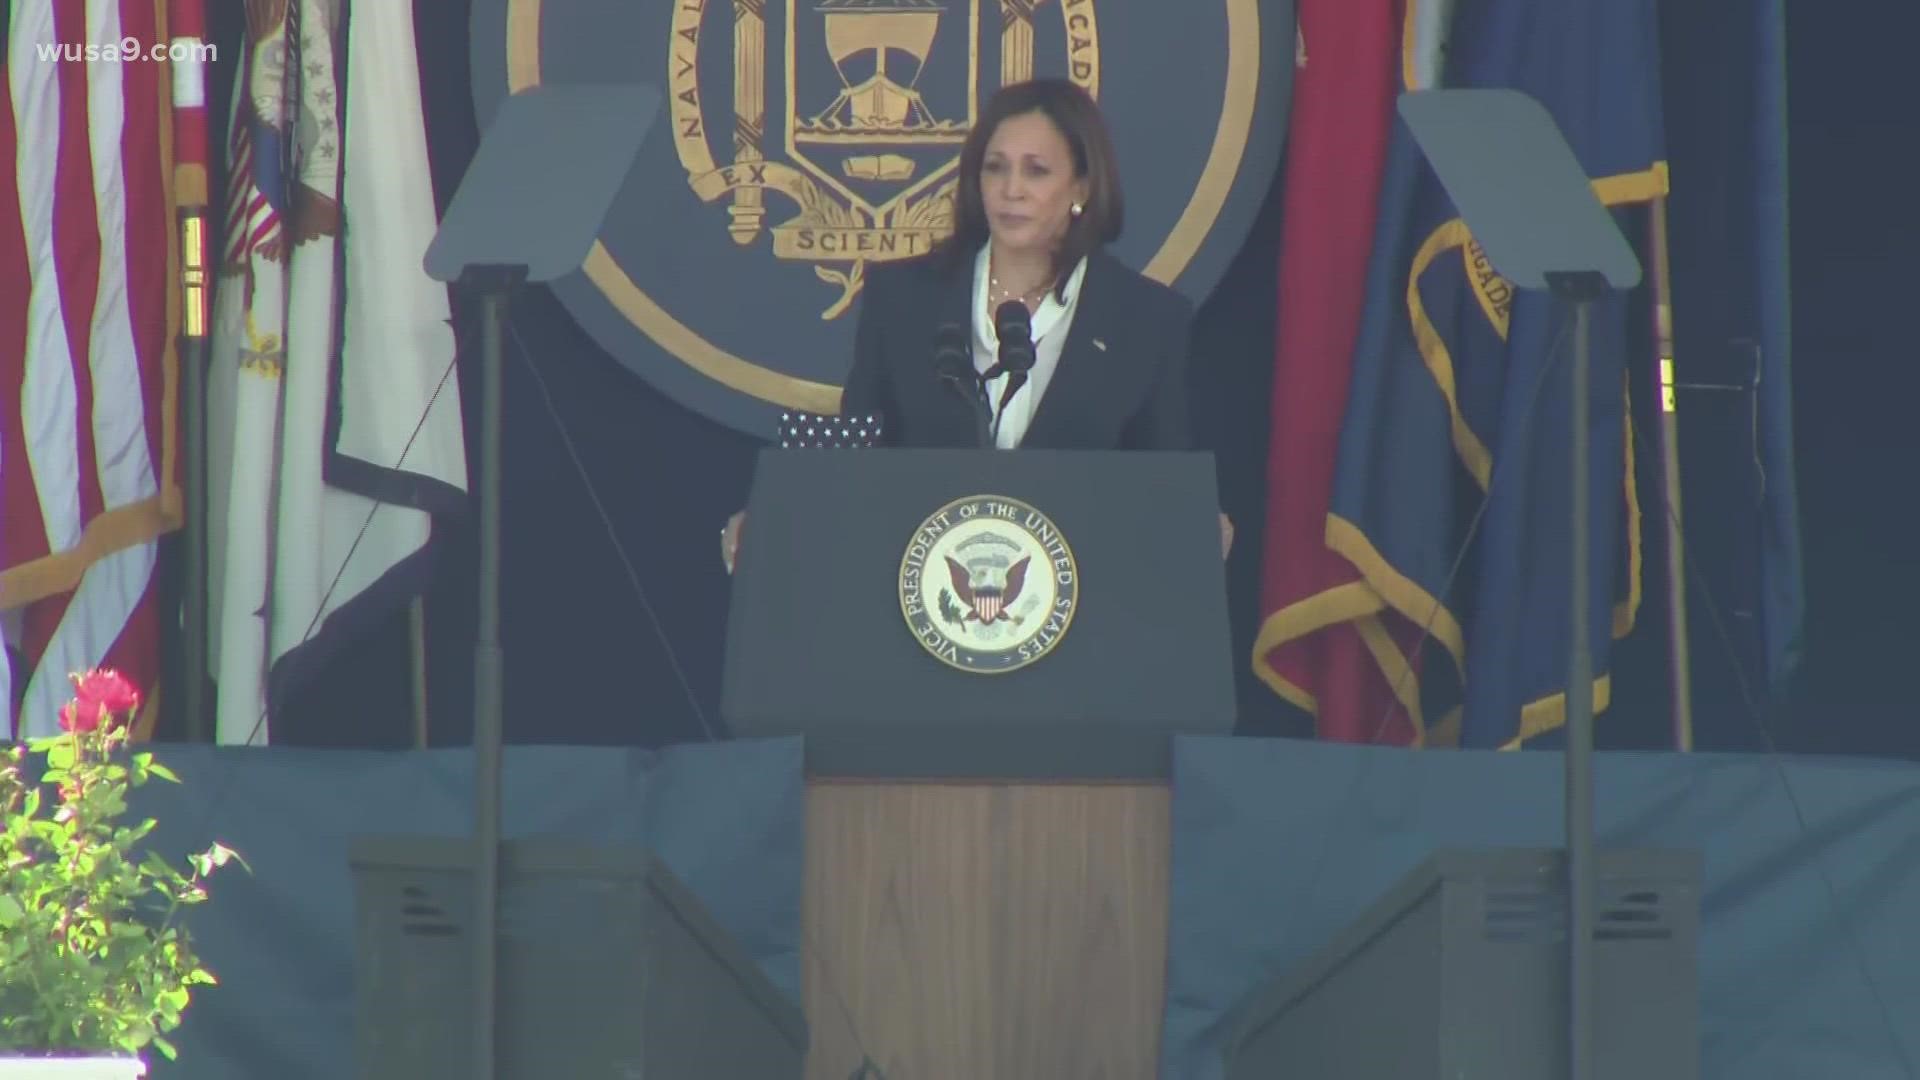 VP Kamala Harris gives the keynote speech to about 1,000 students graduating from the Naval Academy at an in-person ceremony Friday